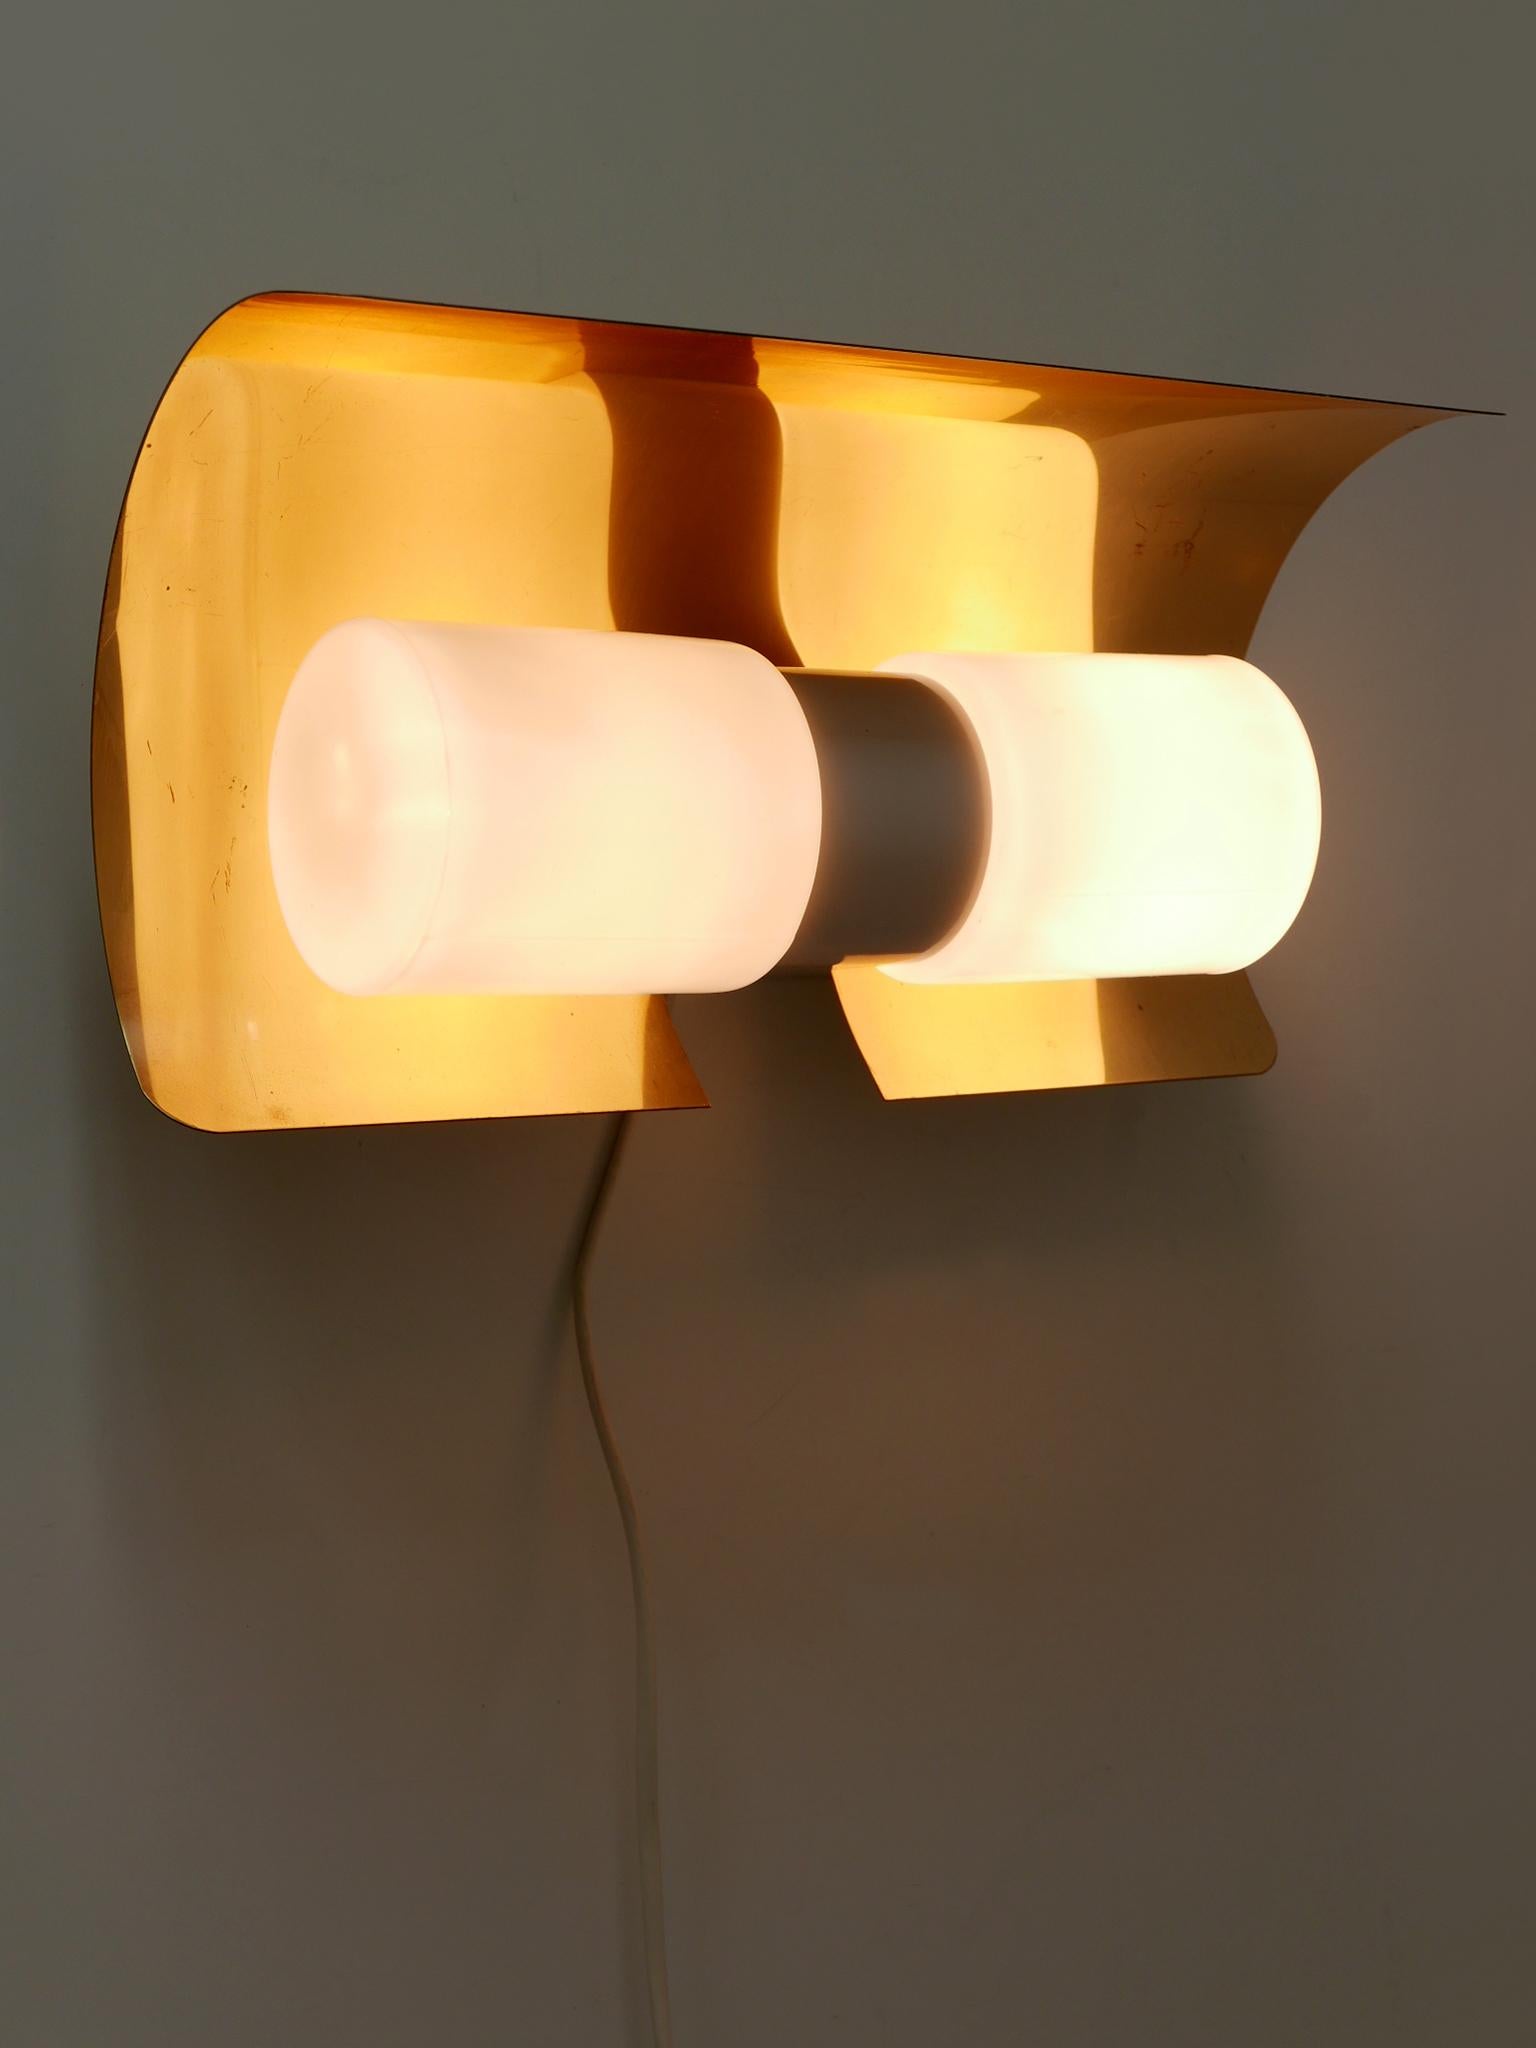 Rare Mid Century Modern Sconce by Hans-Agne Jakobsson for AB Markaryd 1950s For Sale 4